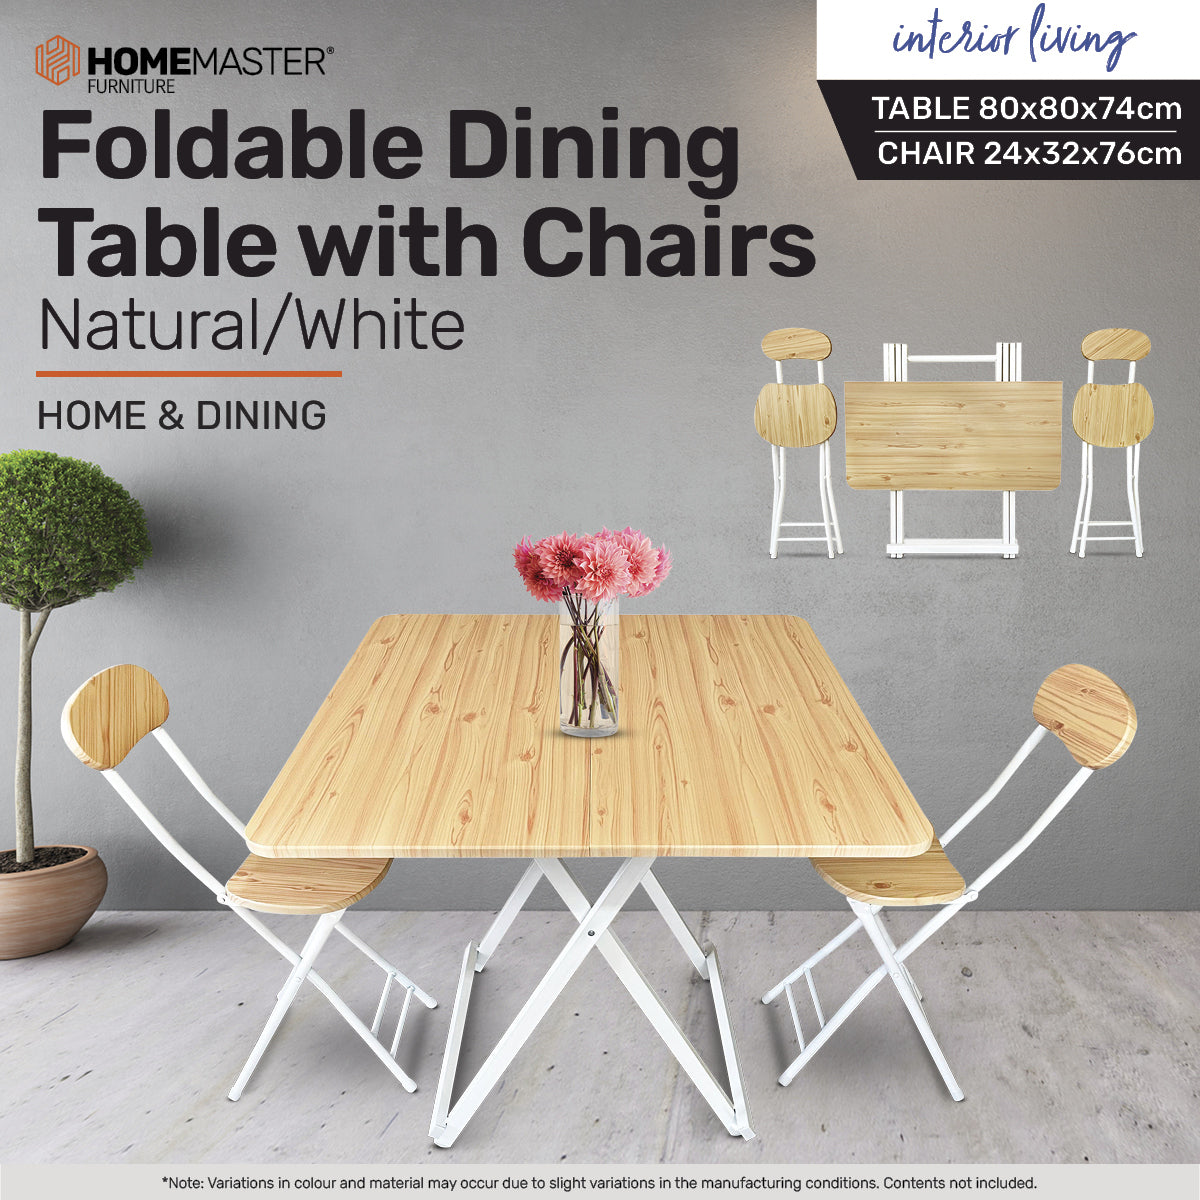 Home Master Foldable Dining Table & Chairs Indoor/Outdoor Sturdy 74 x 80cm Deals499